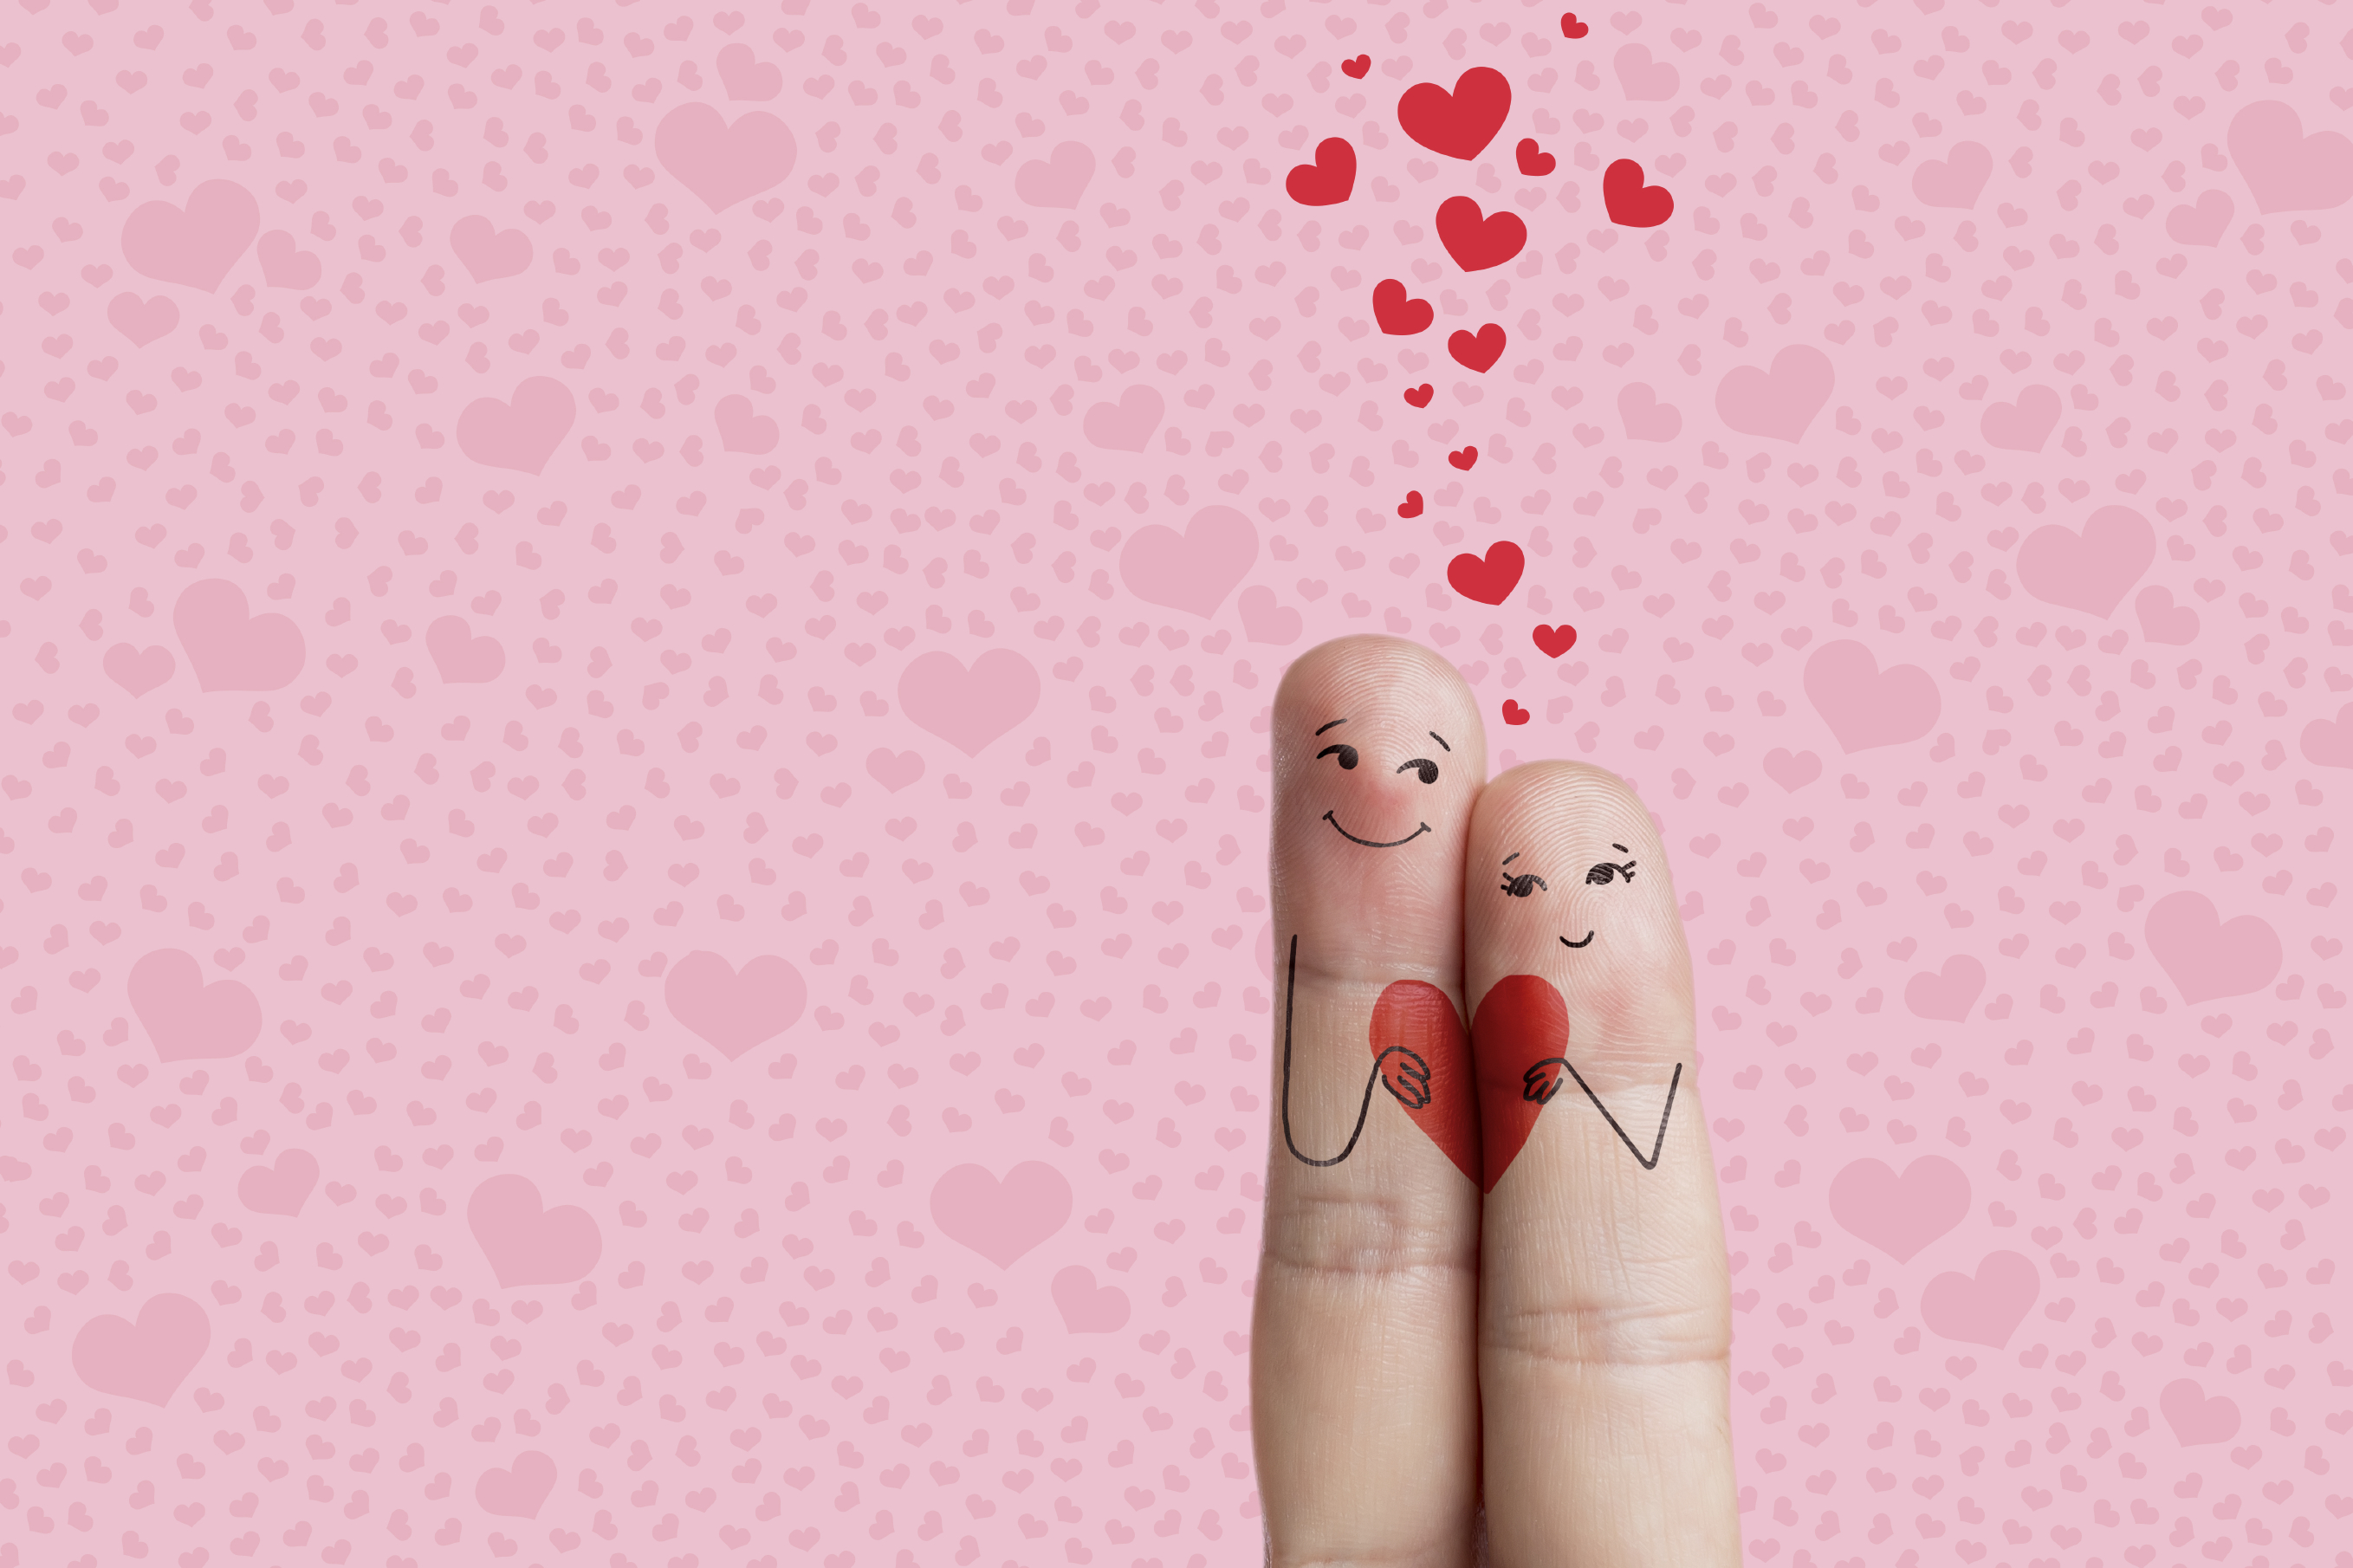 Happy Valentine's Day theme series. Painted fingers smile and love. There are path included in image. You can easily cut out fingers from the background. And insert them into a different scene from this series